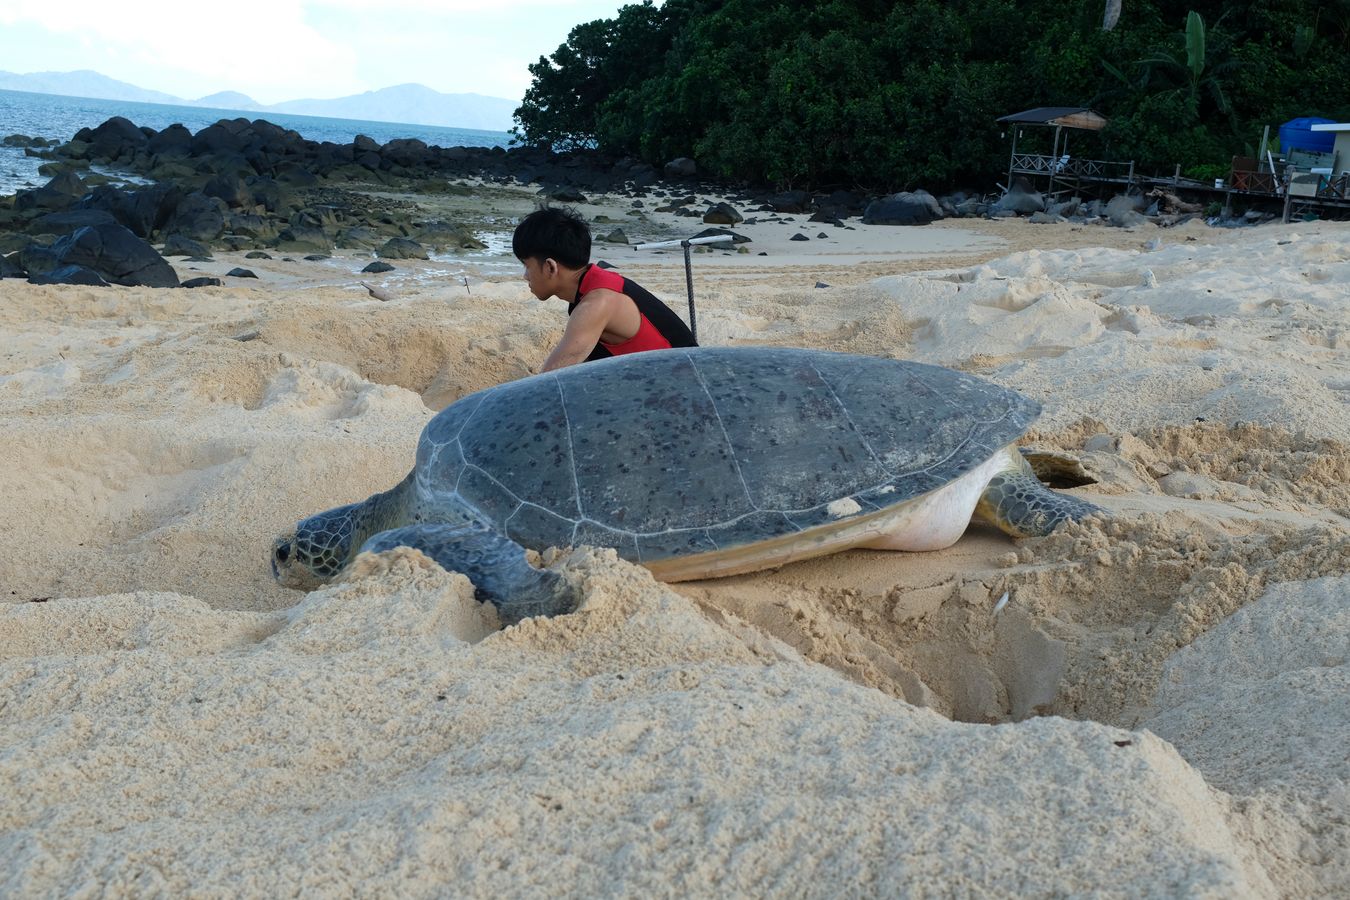 A green turtle on its way back to the ocean passes Aidil collecting eggs from a nest. 